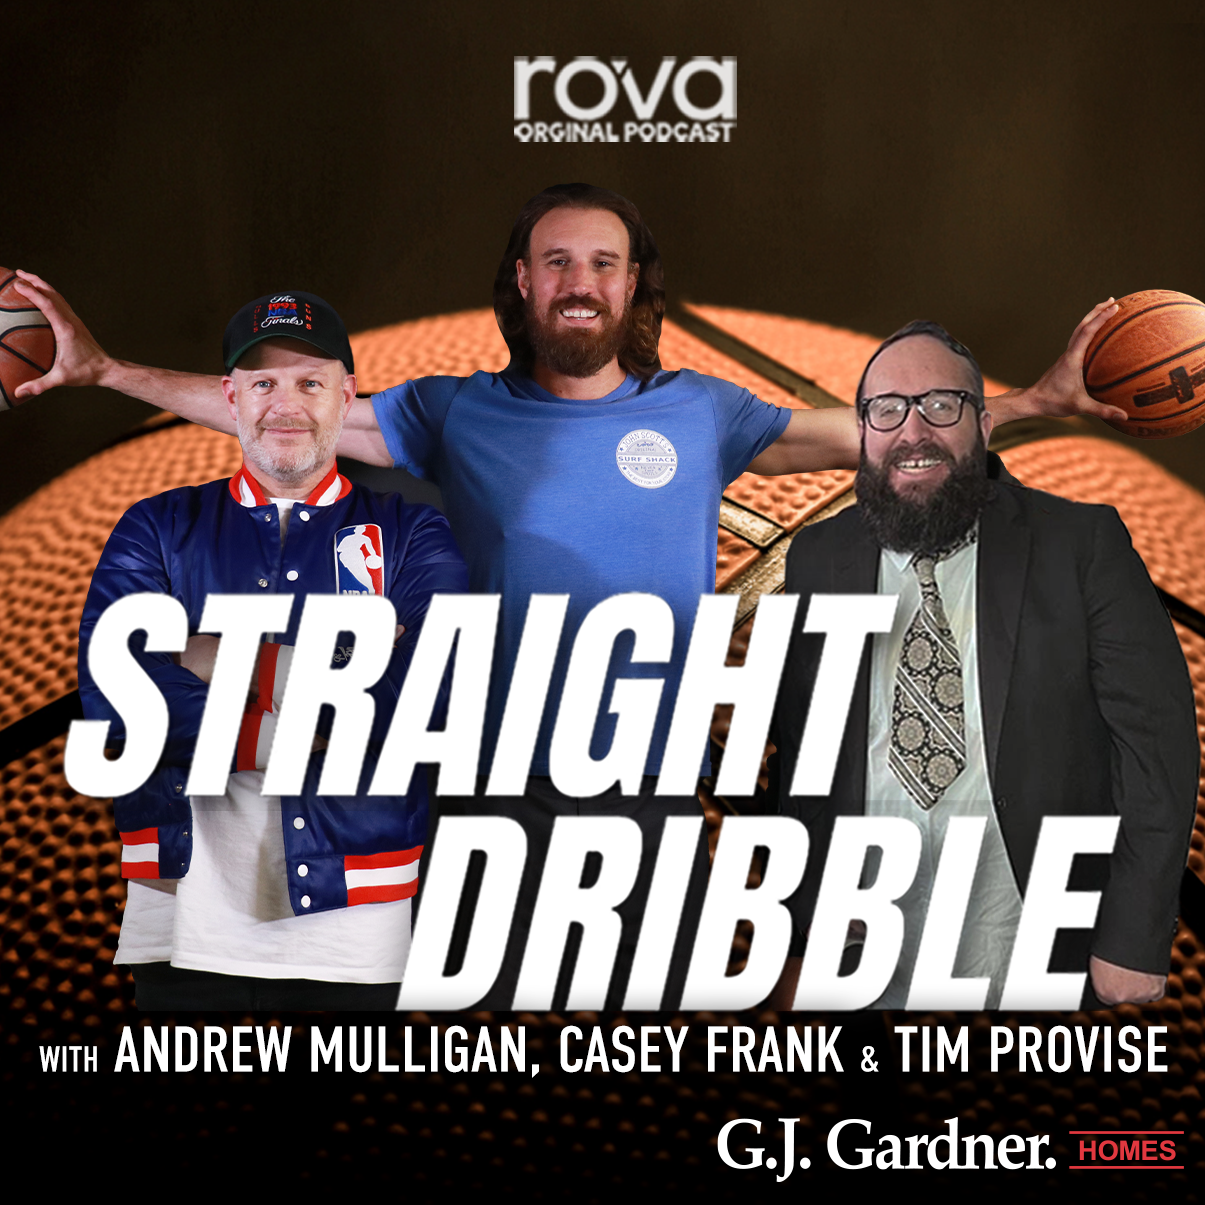 Straight Dribble - 'Oh he's gooood' Tim Provise joins us!